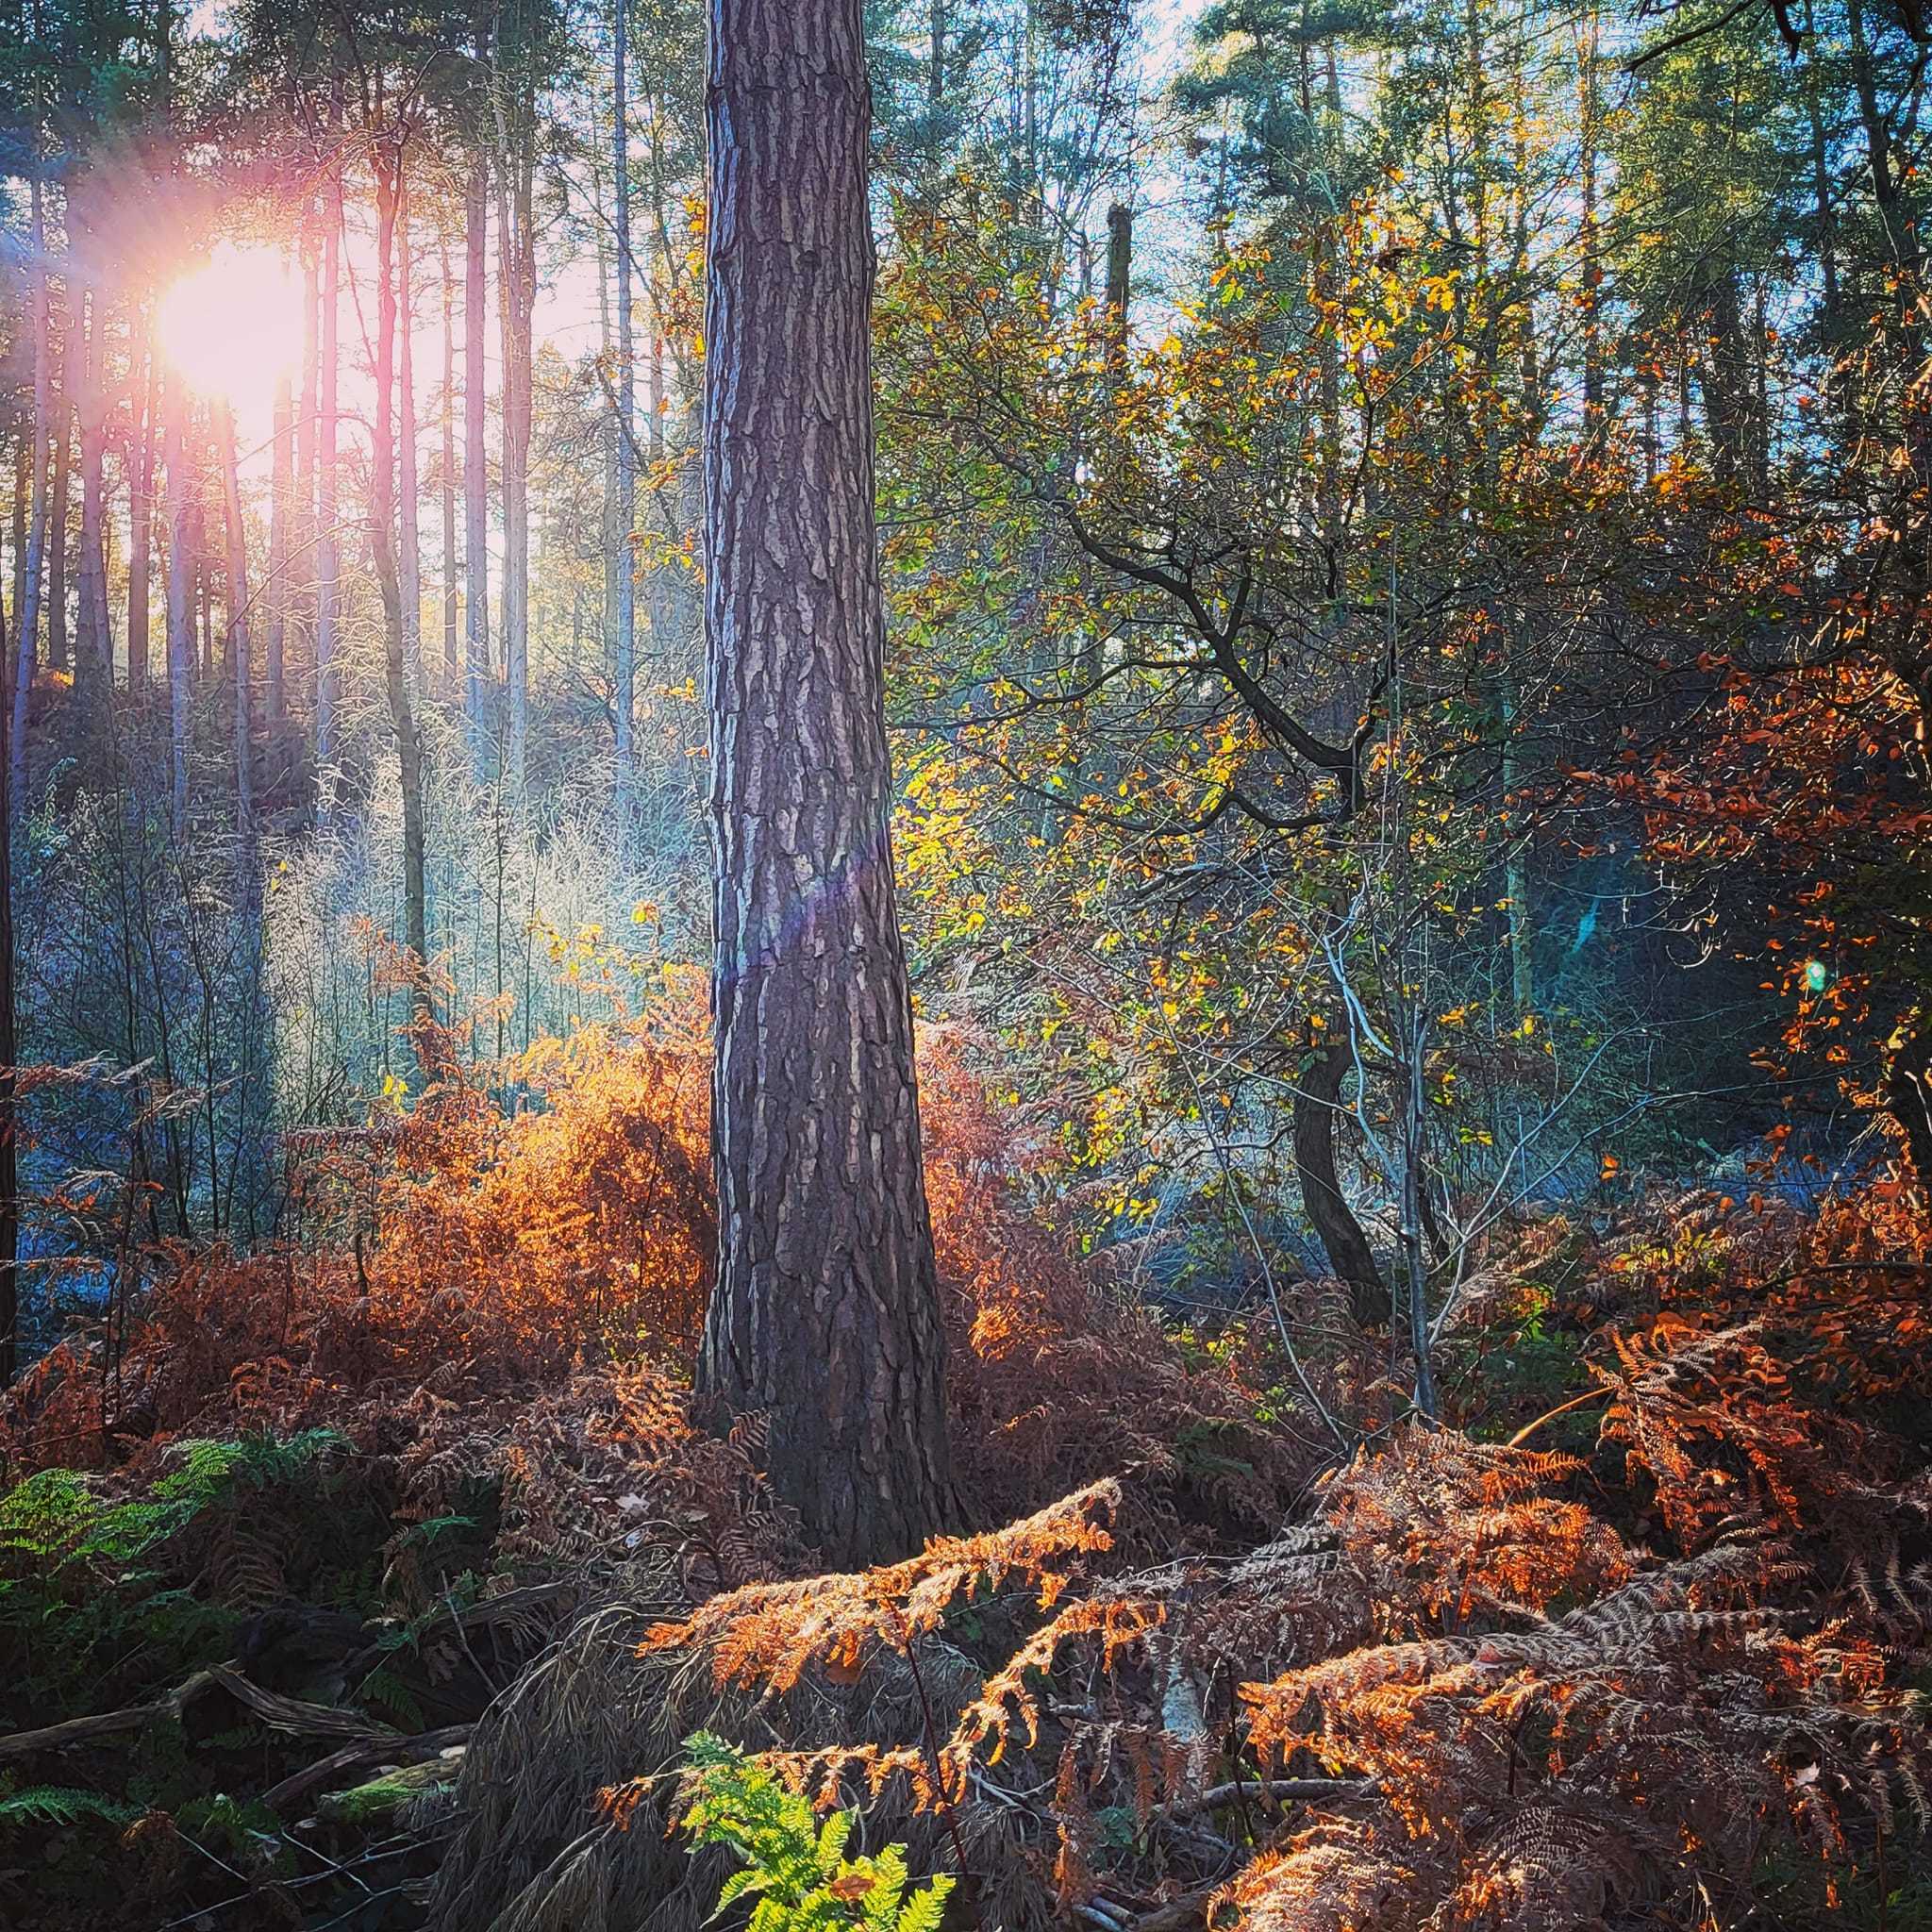 Sunbeams through the trees at Delamere Forest by Karen Waldron